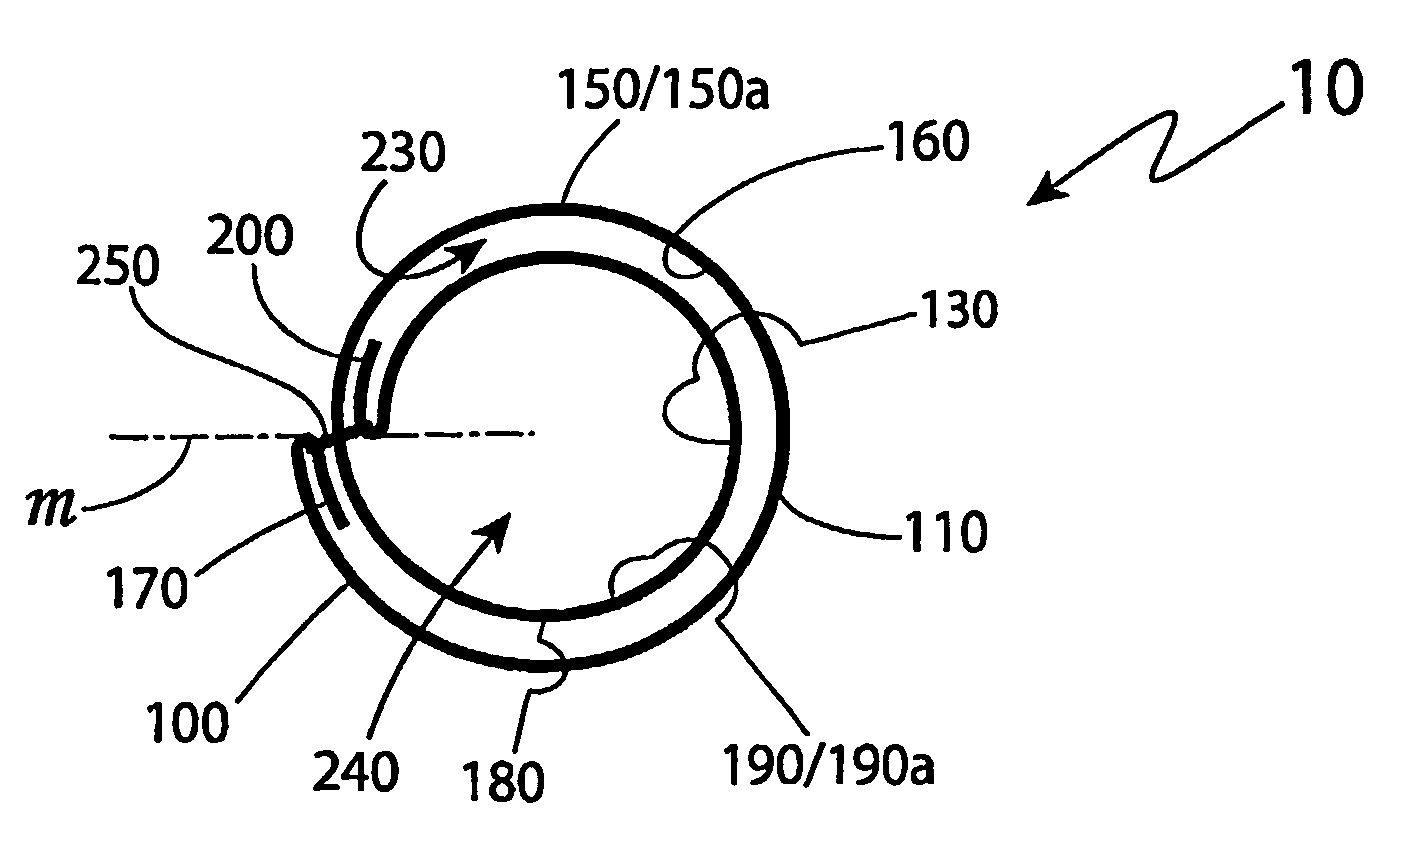 Multilayered pressure vessel and method of manufacturing the same